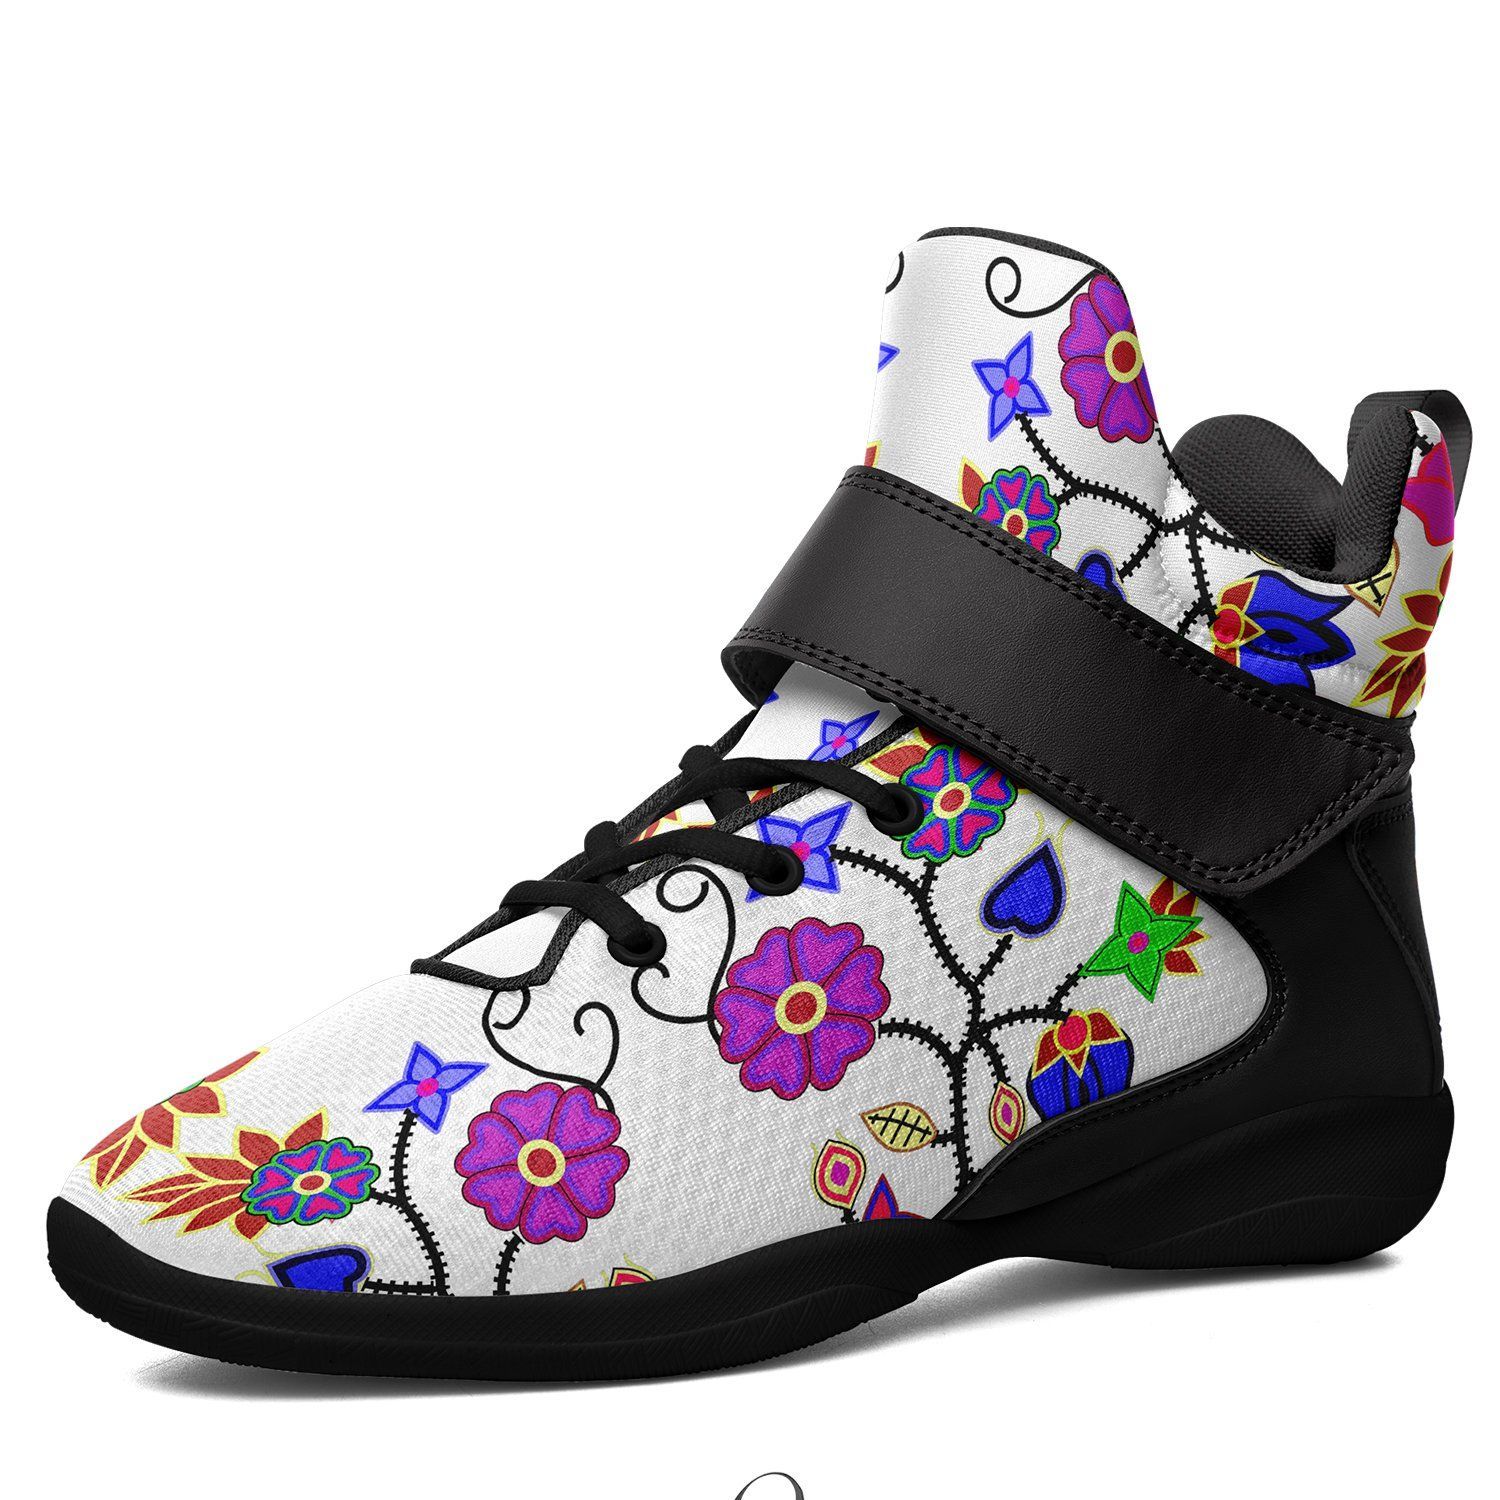 Floral Beadwork Seven Clans White Kid's Ipottaa Basketball / Sport High Top Shoes 49 Dzine US Child 12.5 / EUR 30 Black Sole with Black Strap 